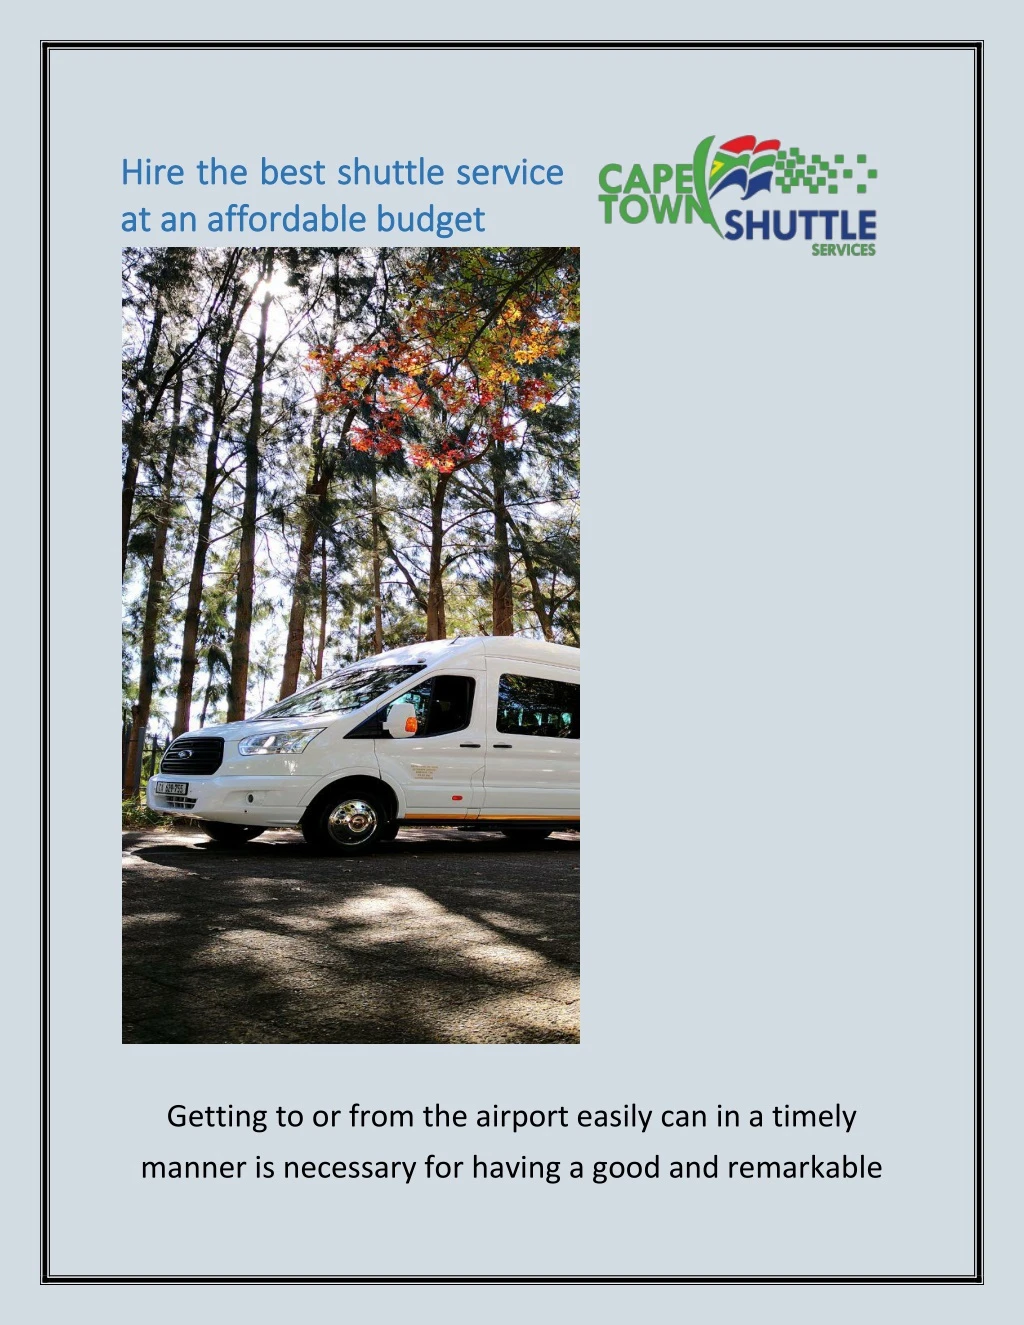 hire the best shuttle service hire the best